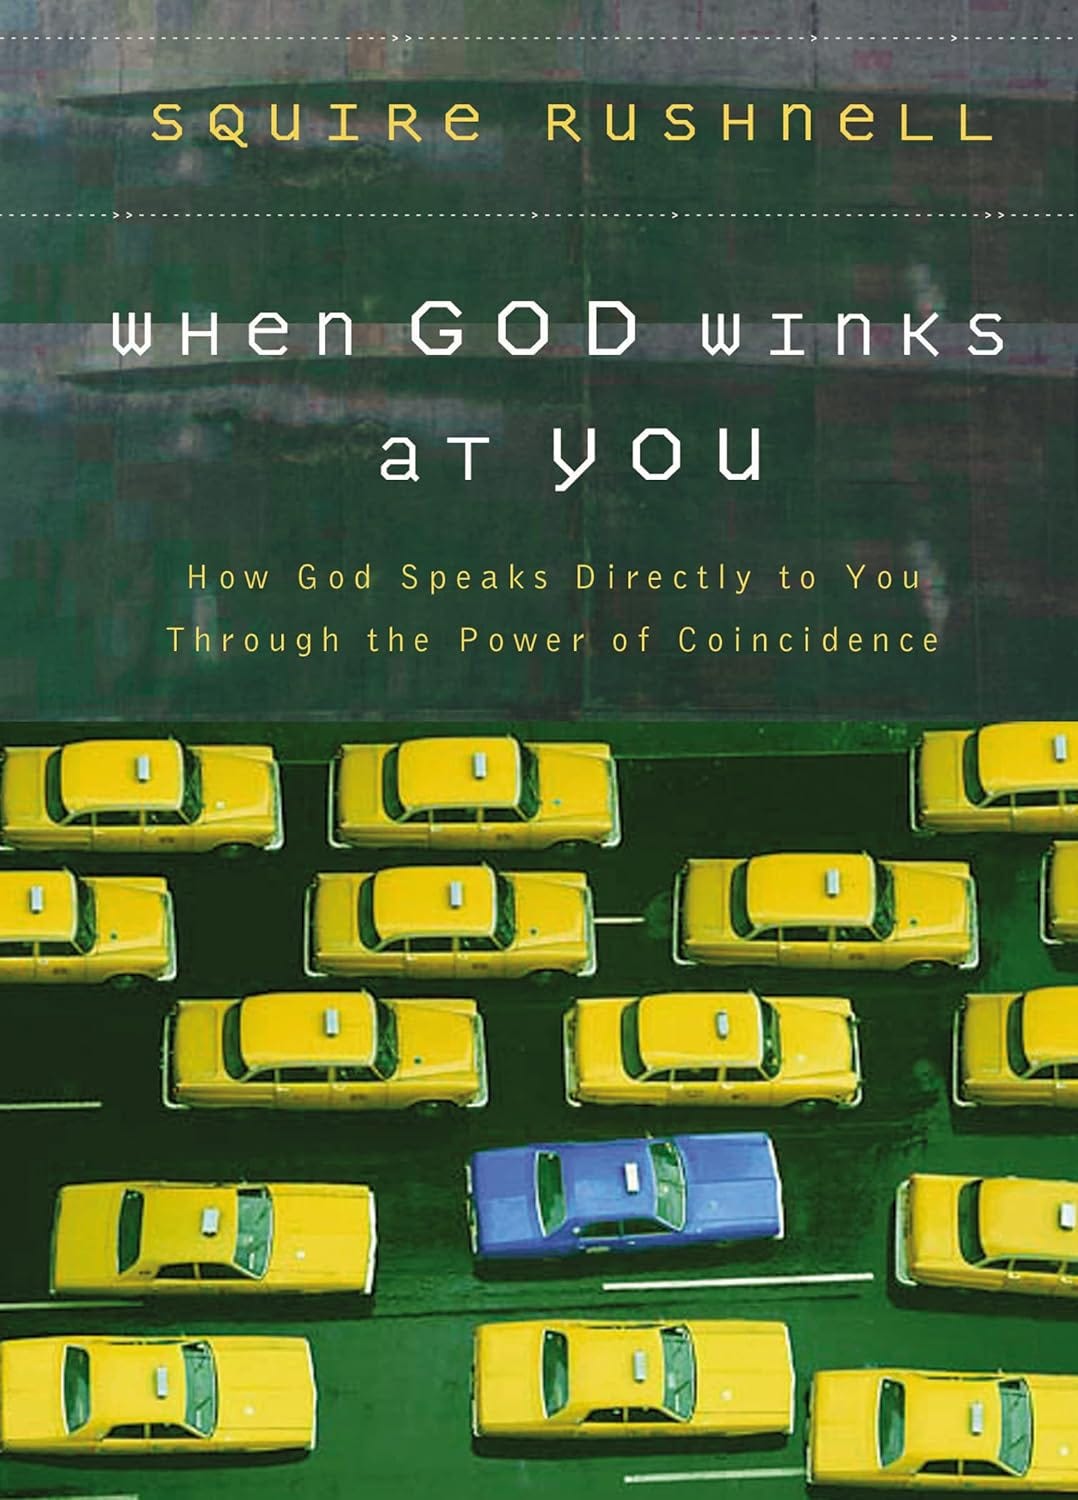 When God Winks at You book by Squire Rushnell